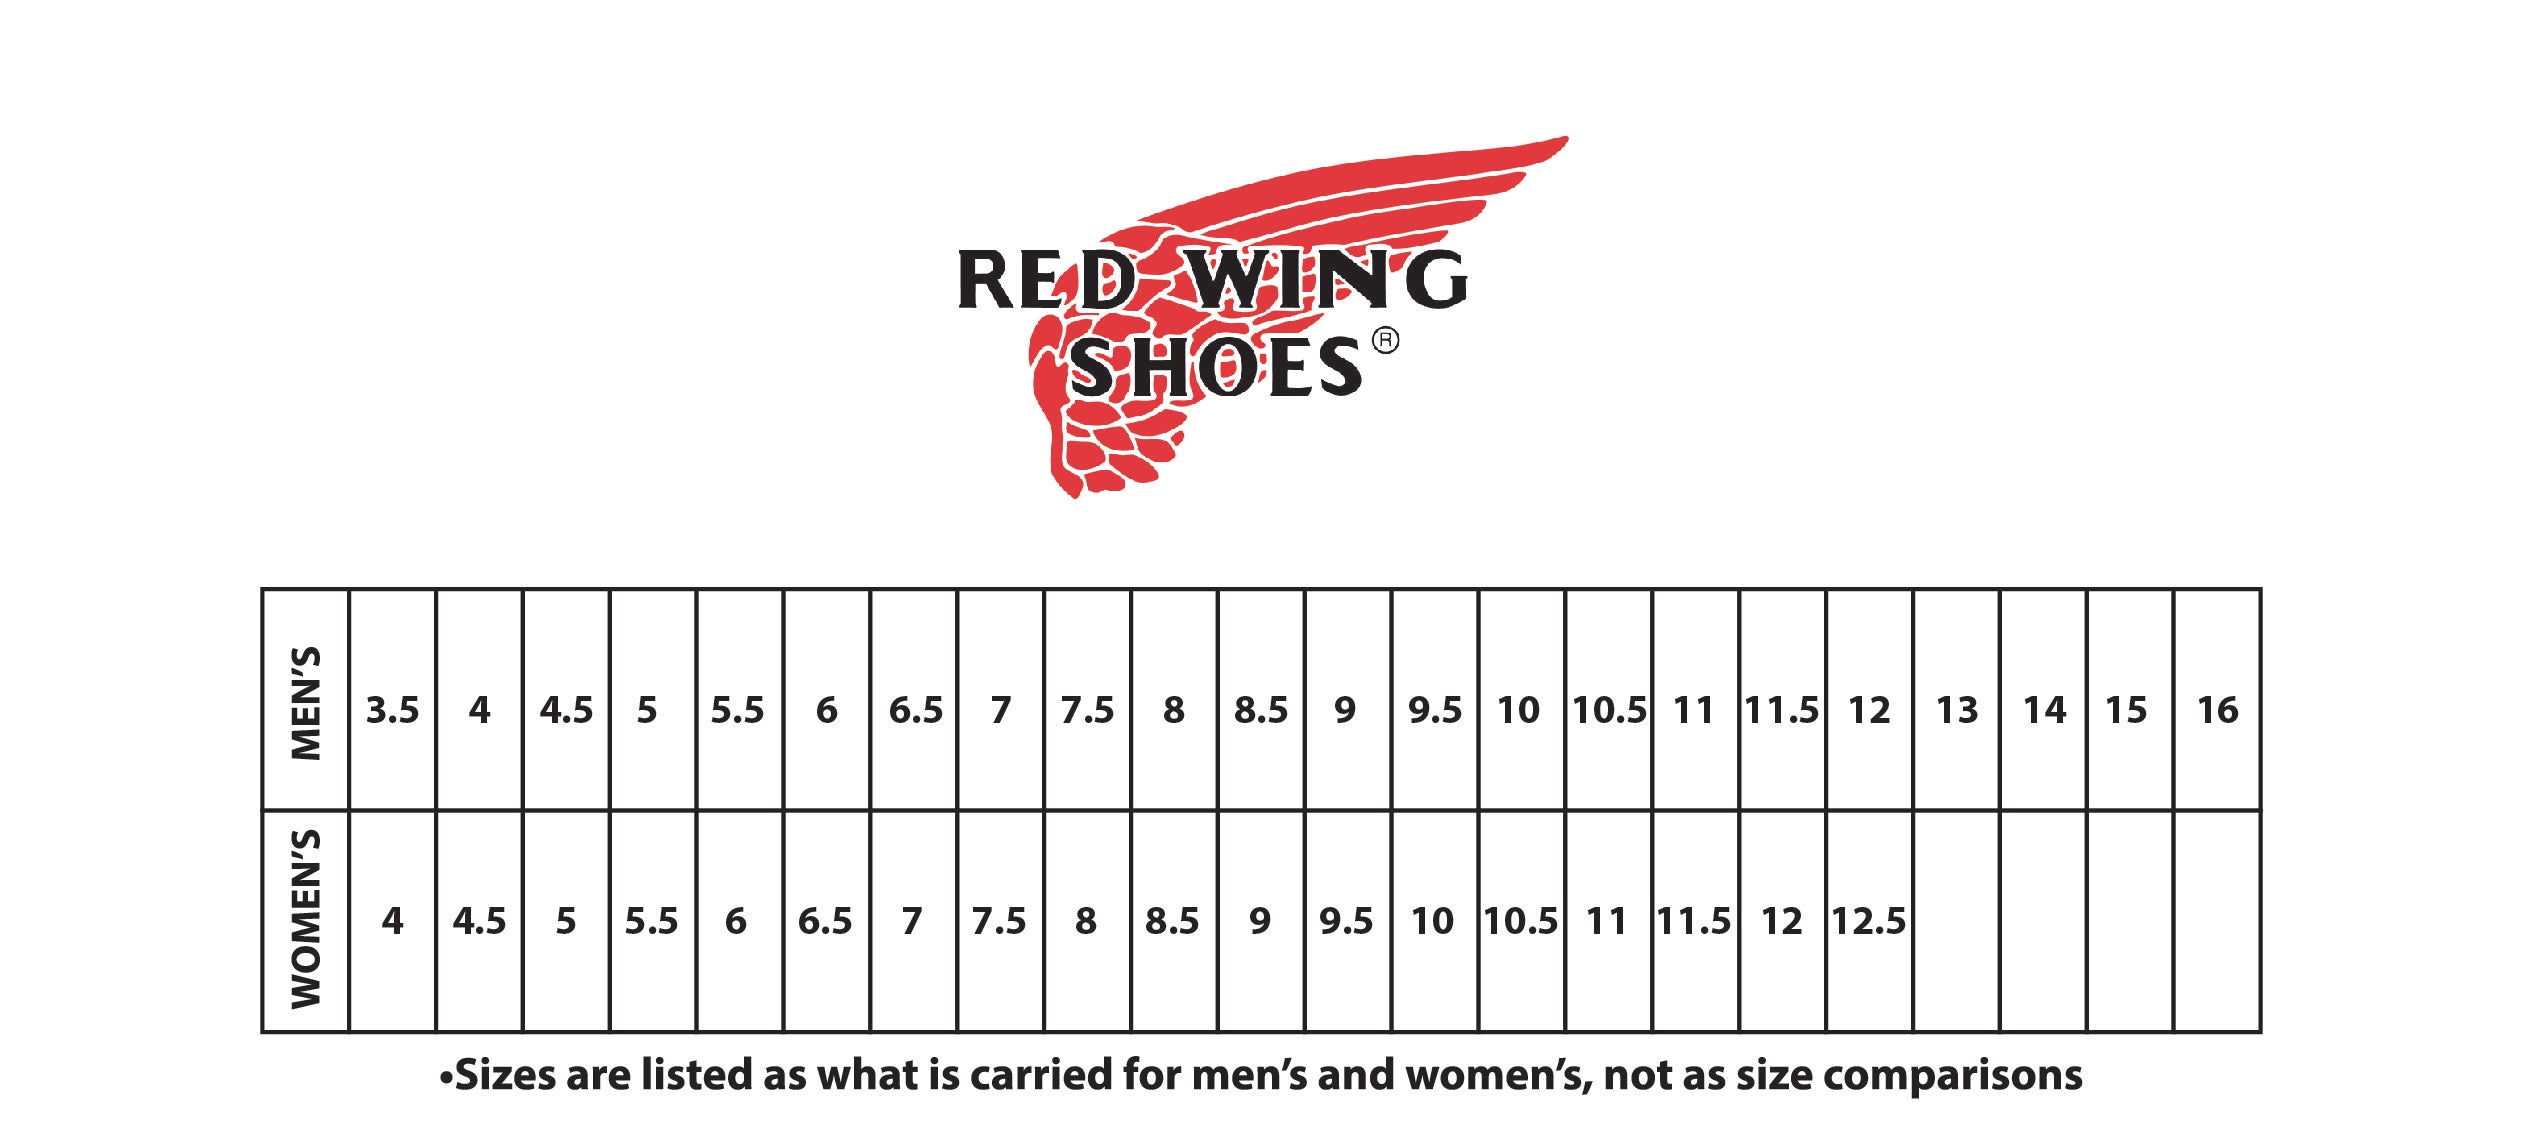 RED WING SHOES FOOTWEAR SIZE CHART